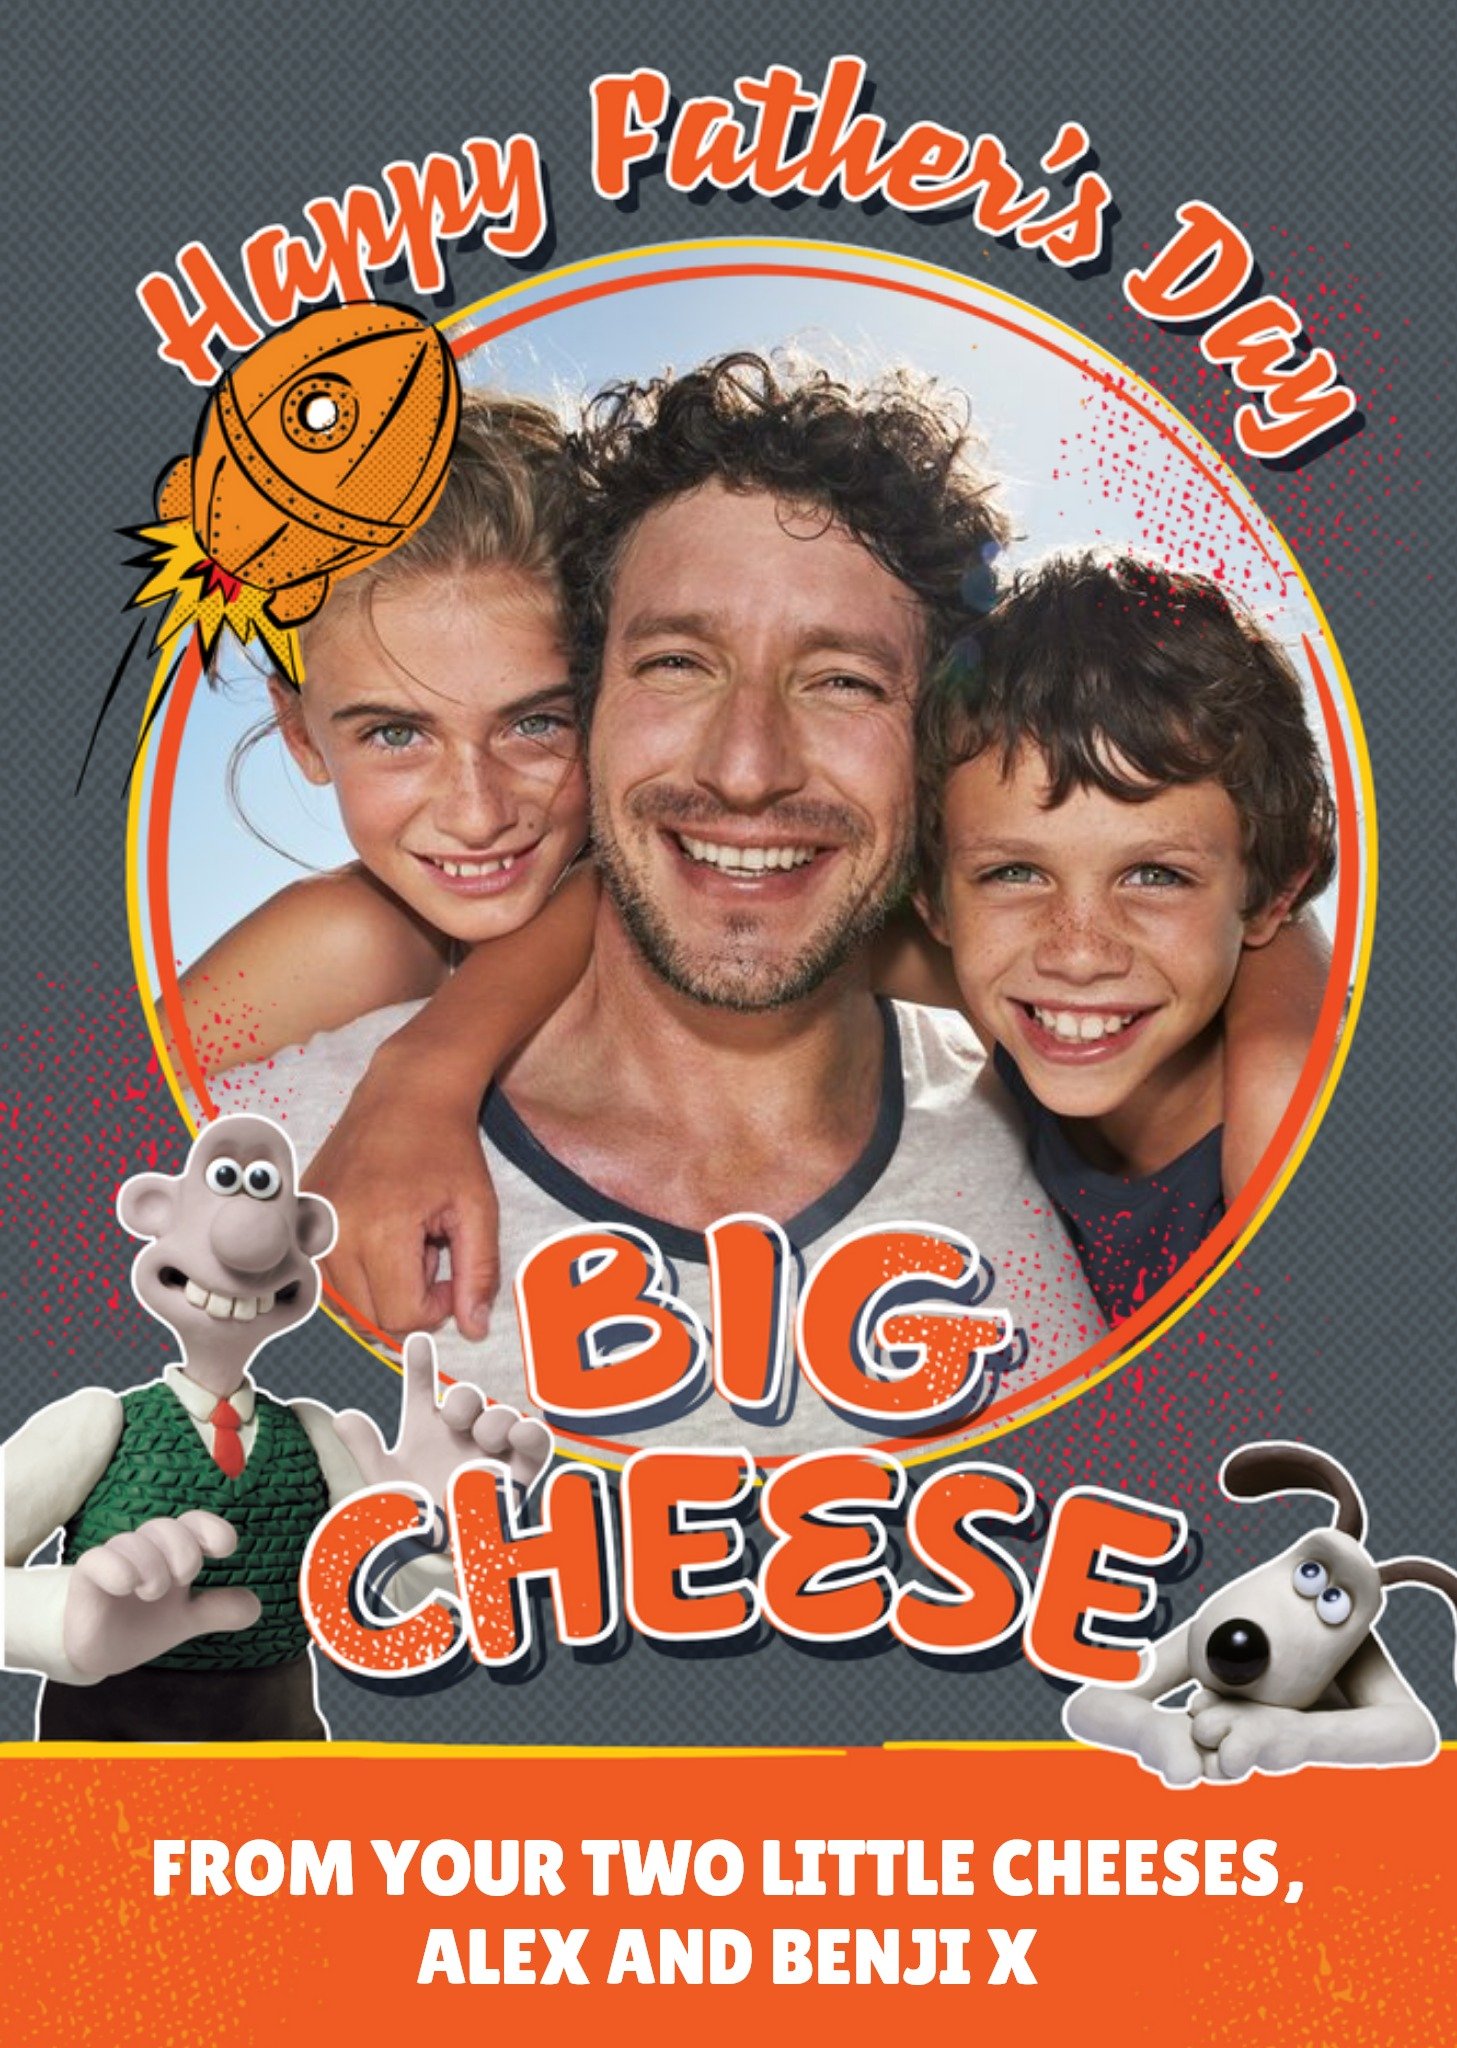 Wallace And Gromit Wallace & Gromit Big Cheese Happy Father's Day Photo Card, Large